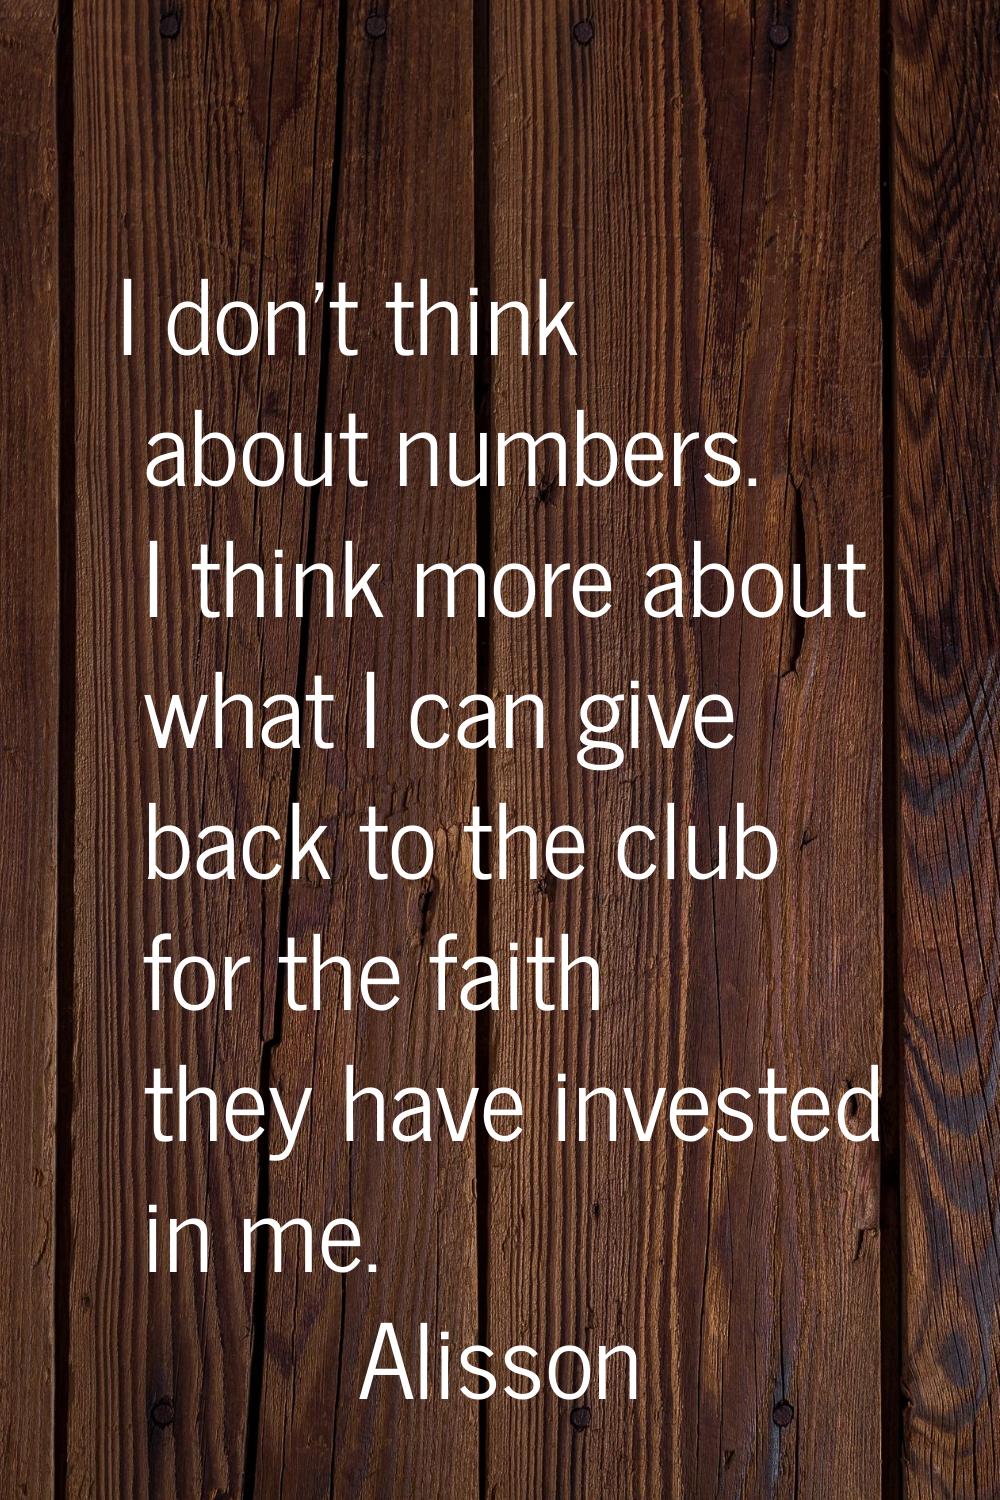 I don't think about numbers. I think more about what I can give back to the club for the faith they